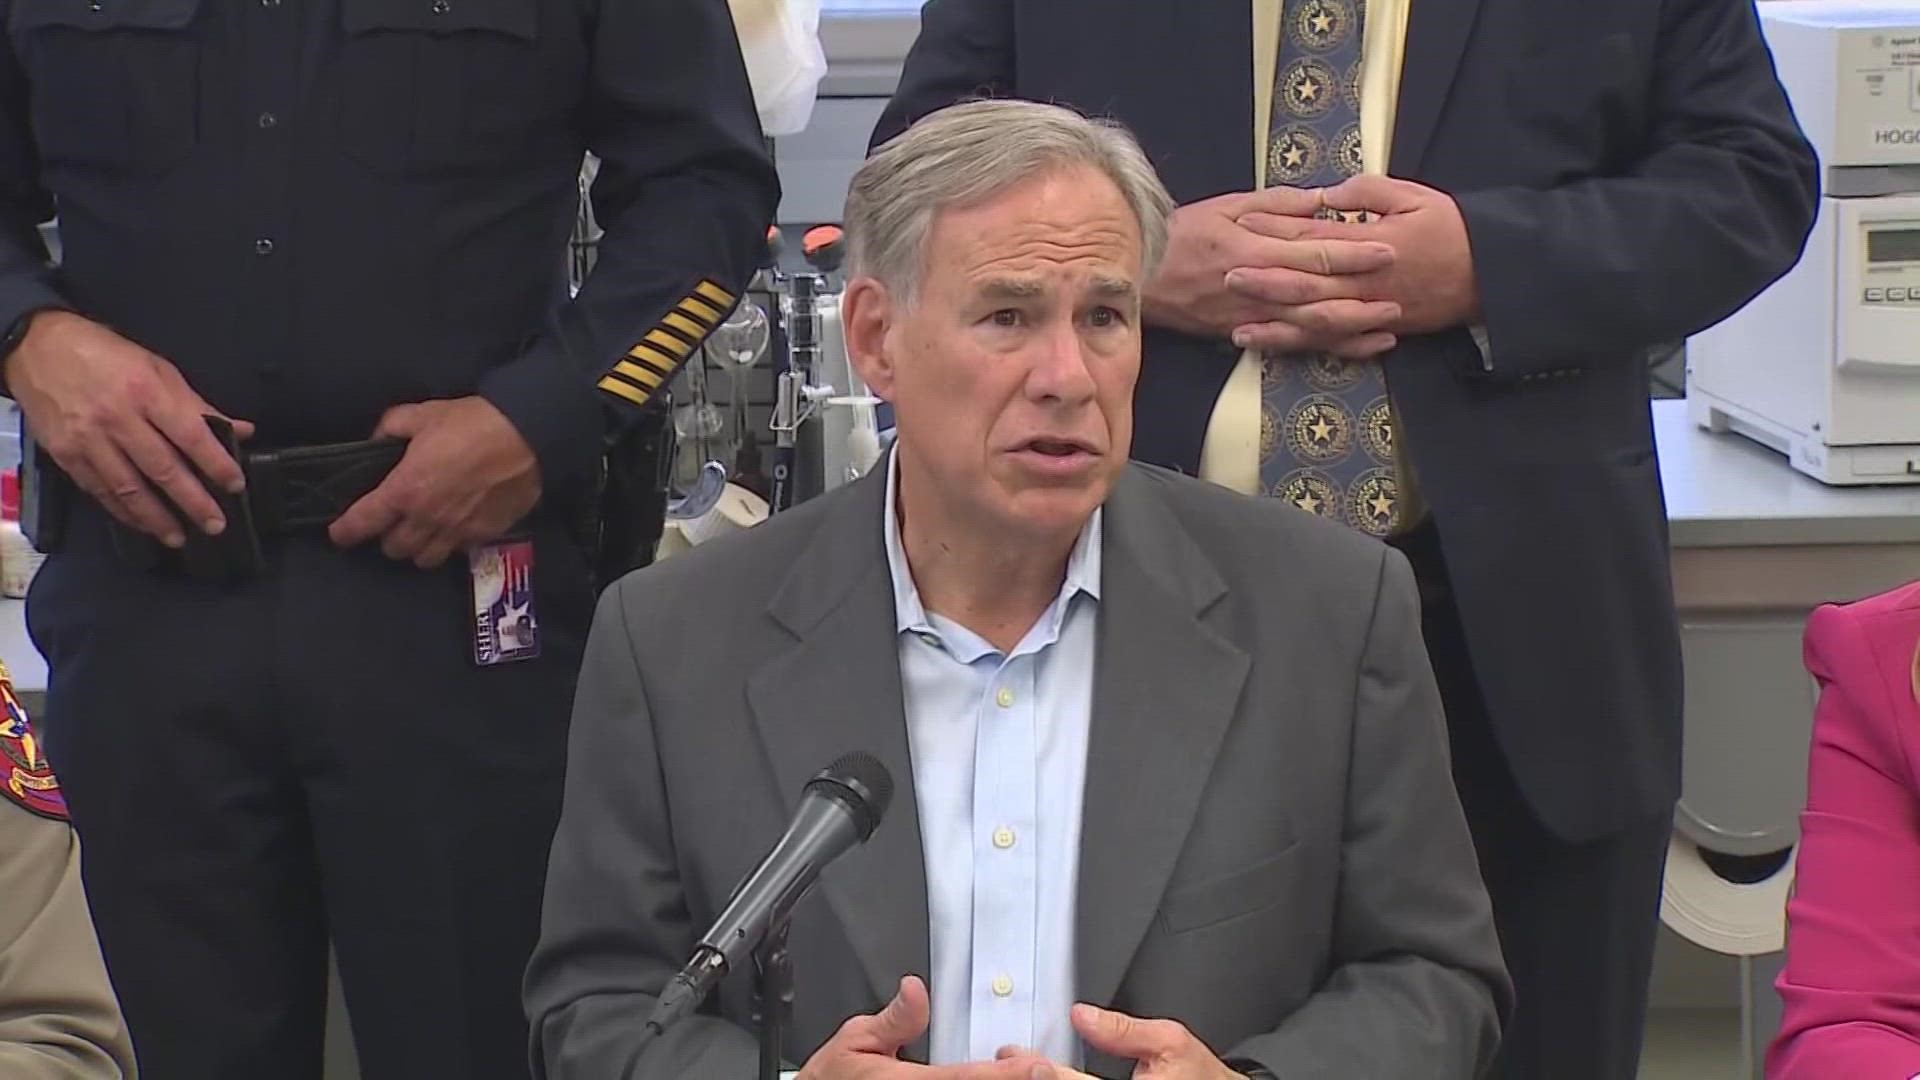 Governor Abbott was in Houston Thursday to discuss fentanyl, but spoke about the Uvalde video that was released Tuesday.